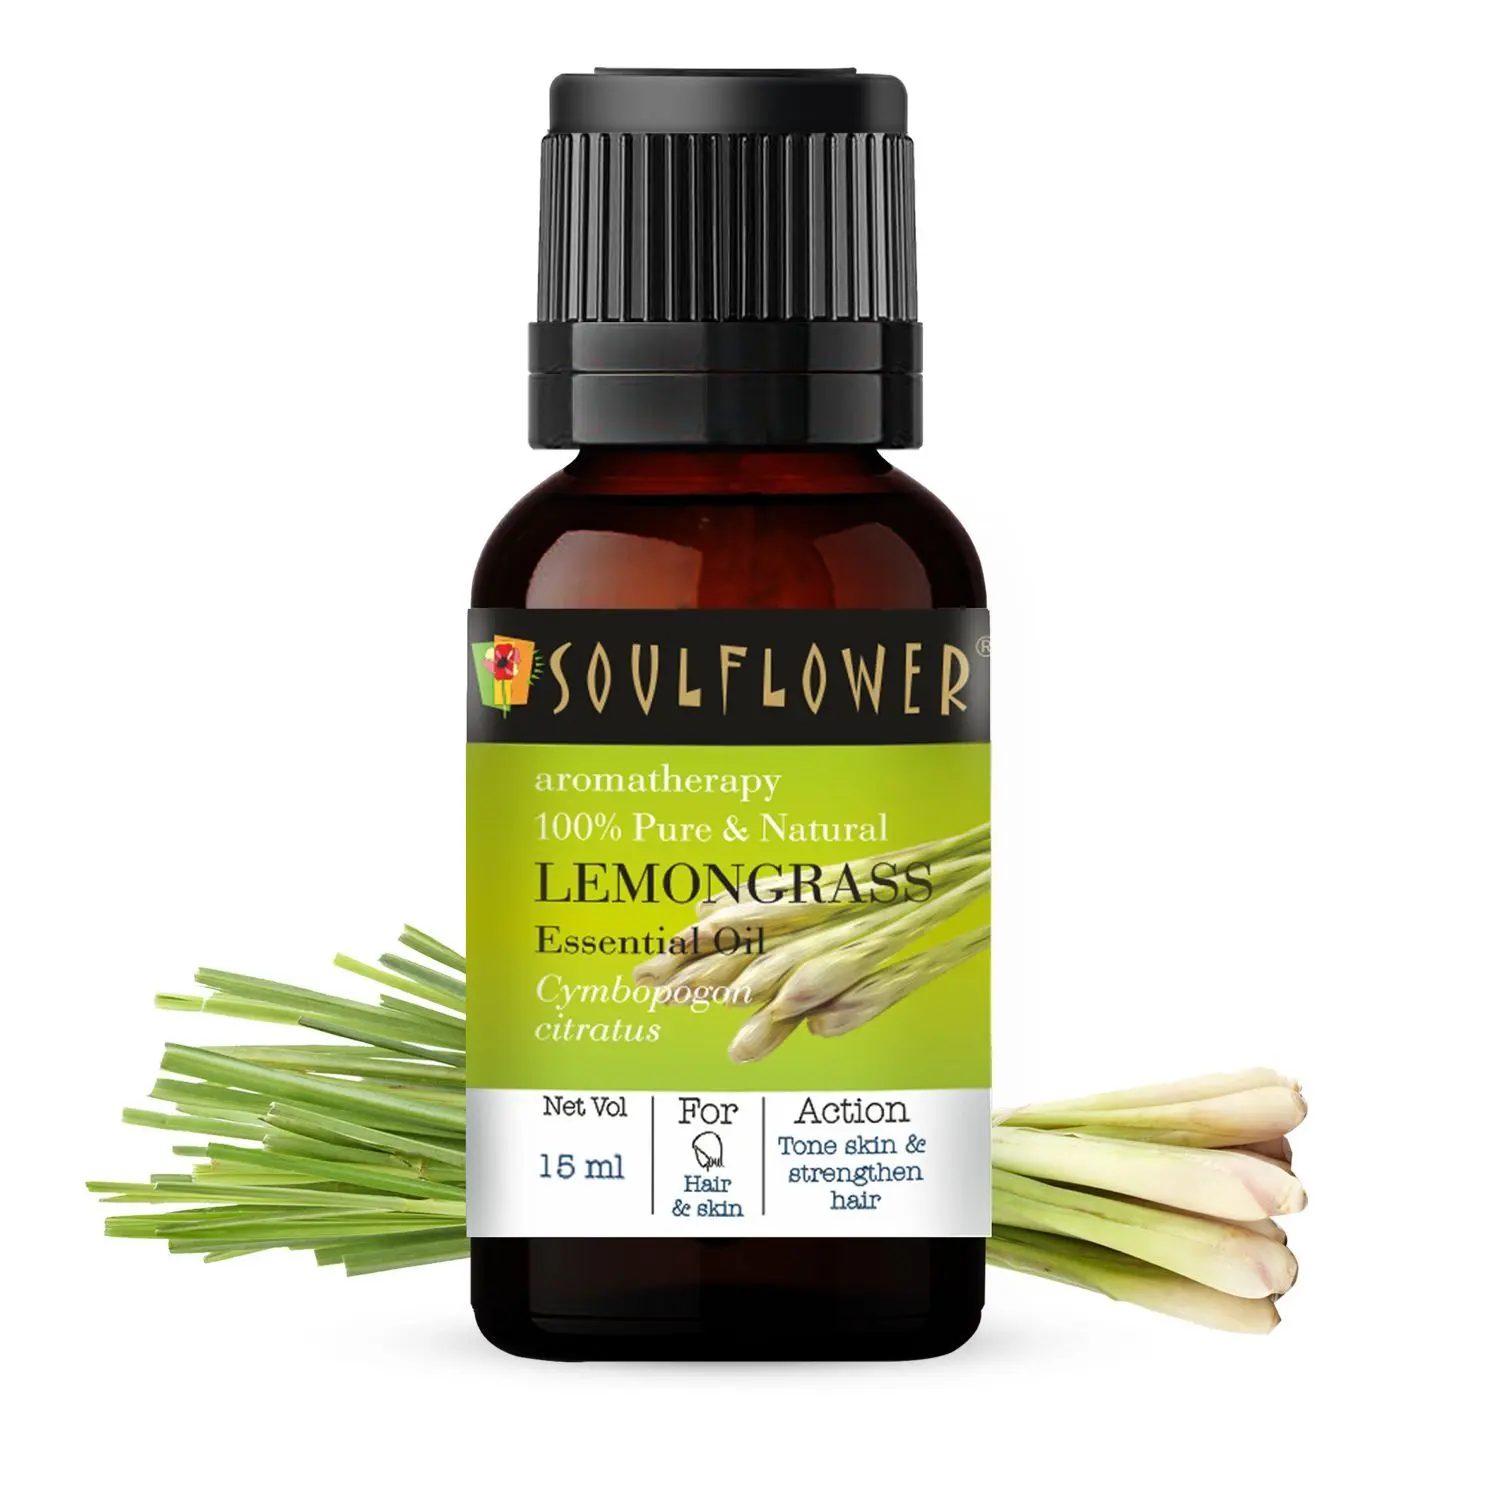 Soulflower Lemongrass Essential Oil, For All Skin & Hair Type, 100% Pure & Natural, Therapeutic Grade Aromatherapy, Citrus, 15ml